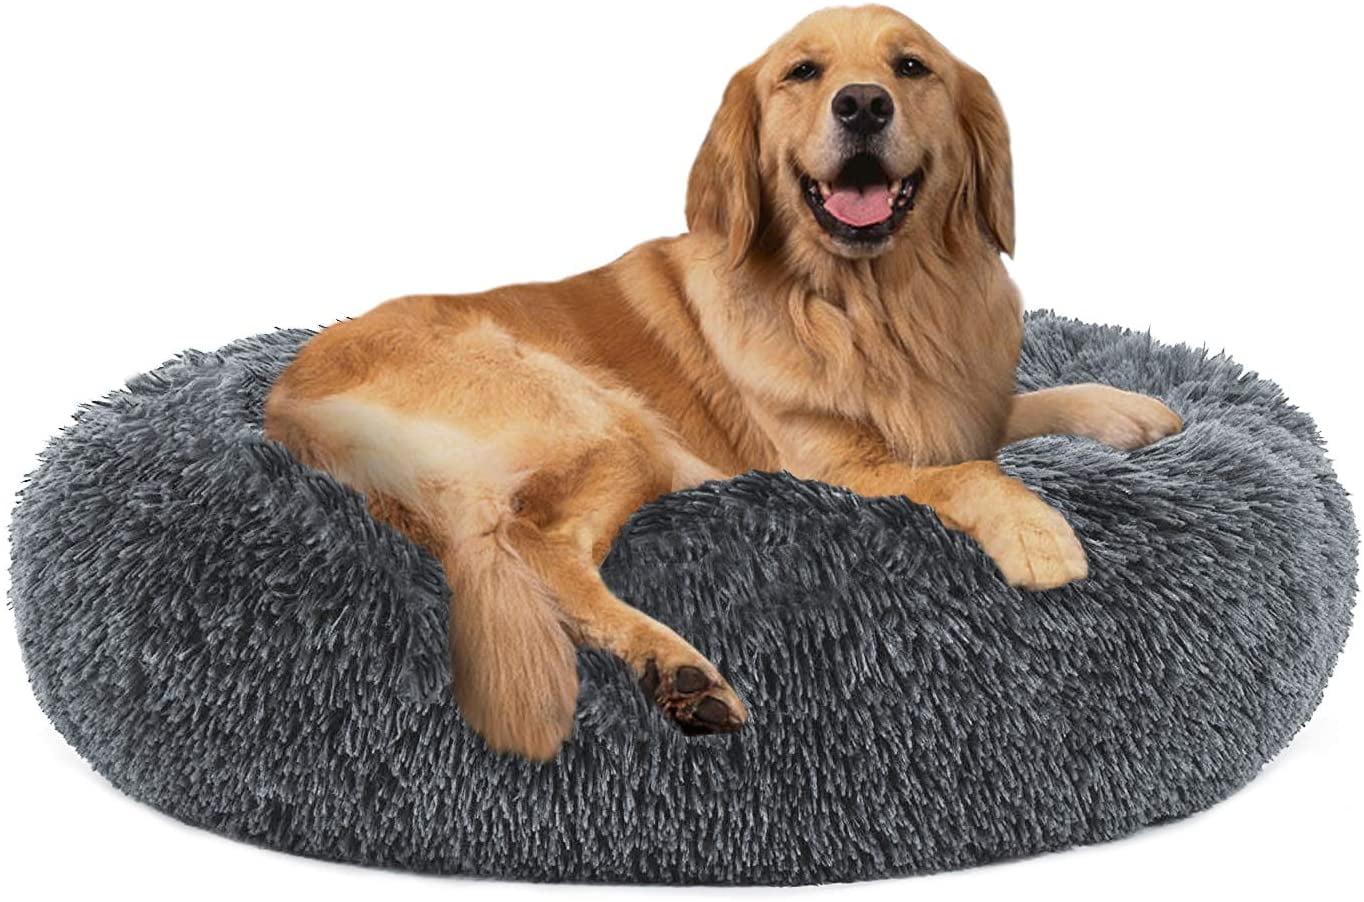 Utotol Donut Dog Bed Self-Warming Faux Fur Calming Pet Bed Comfortable Round Cuddler Dog Bed for Small/Medium/Large Dogs and Cats Up 40-100 lbs 